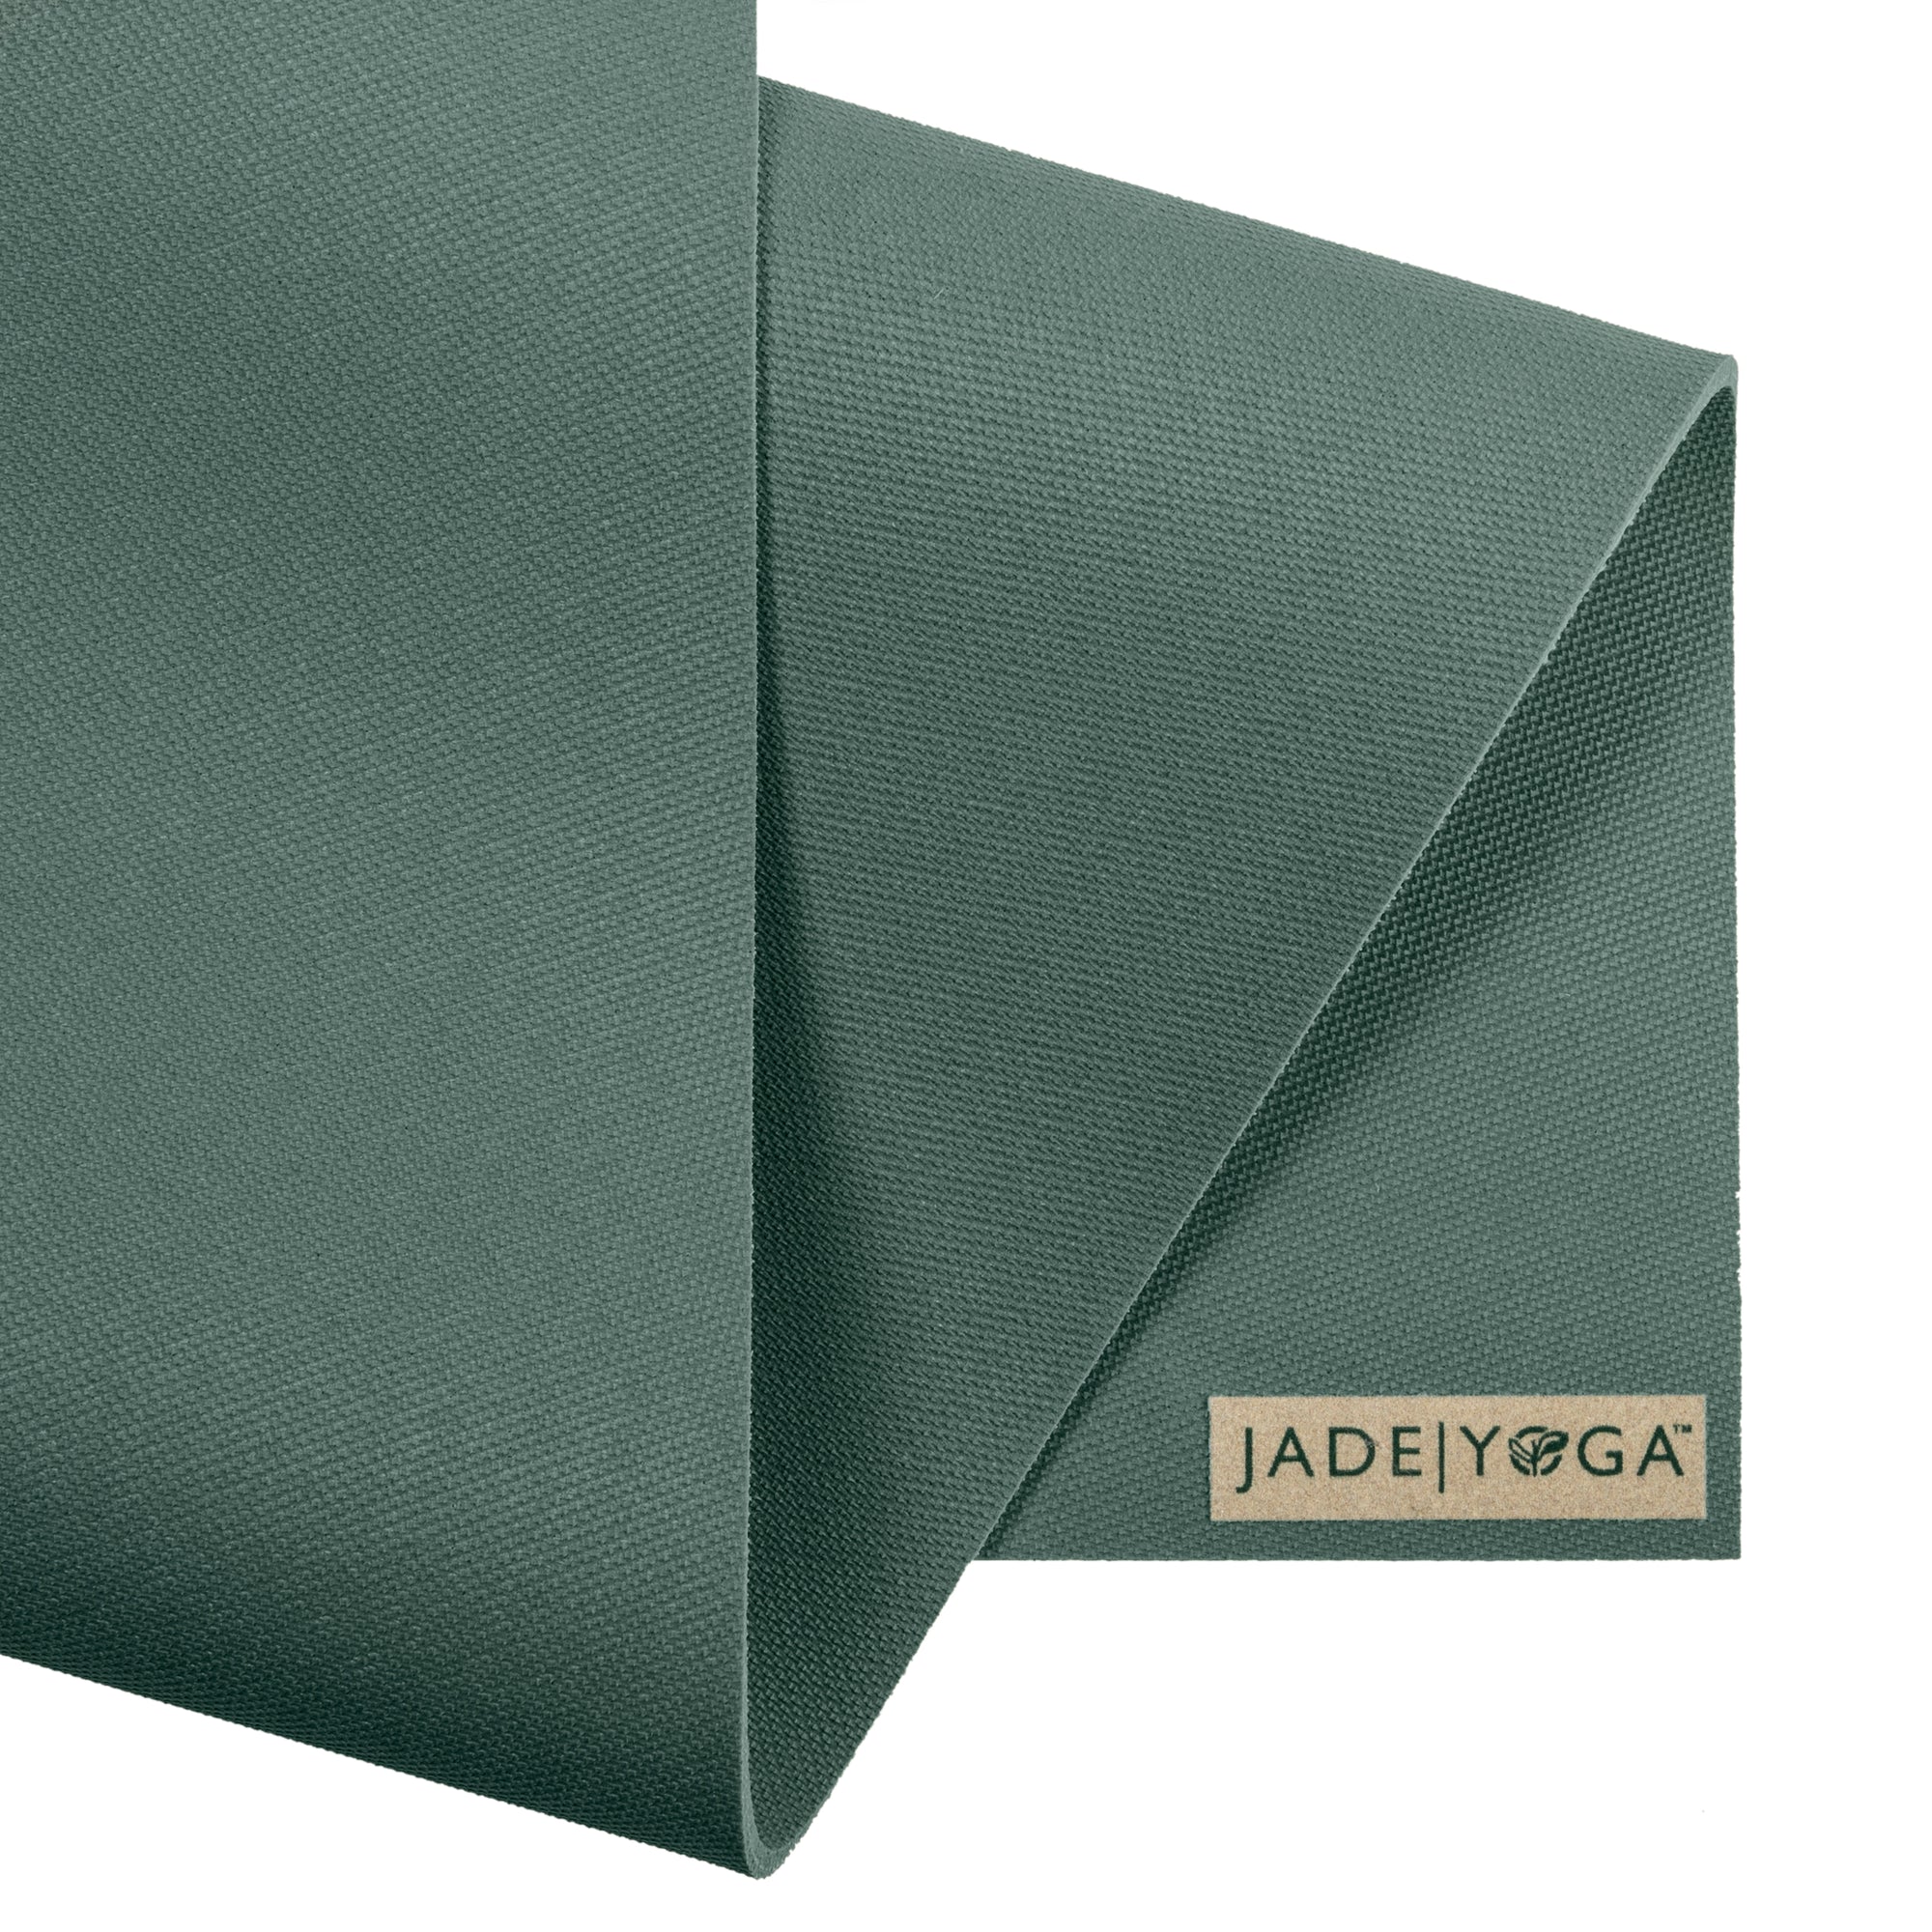 Harmony Mat 4.8mm 68in, Jade Green - NEW! – Touch The Toes